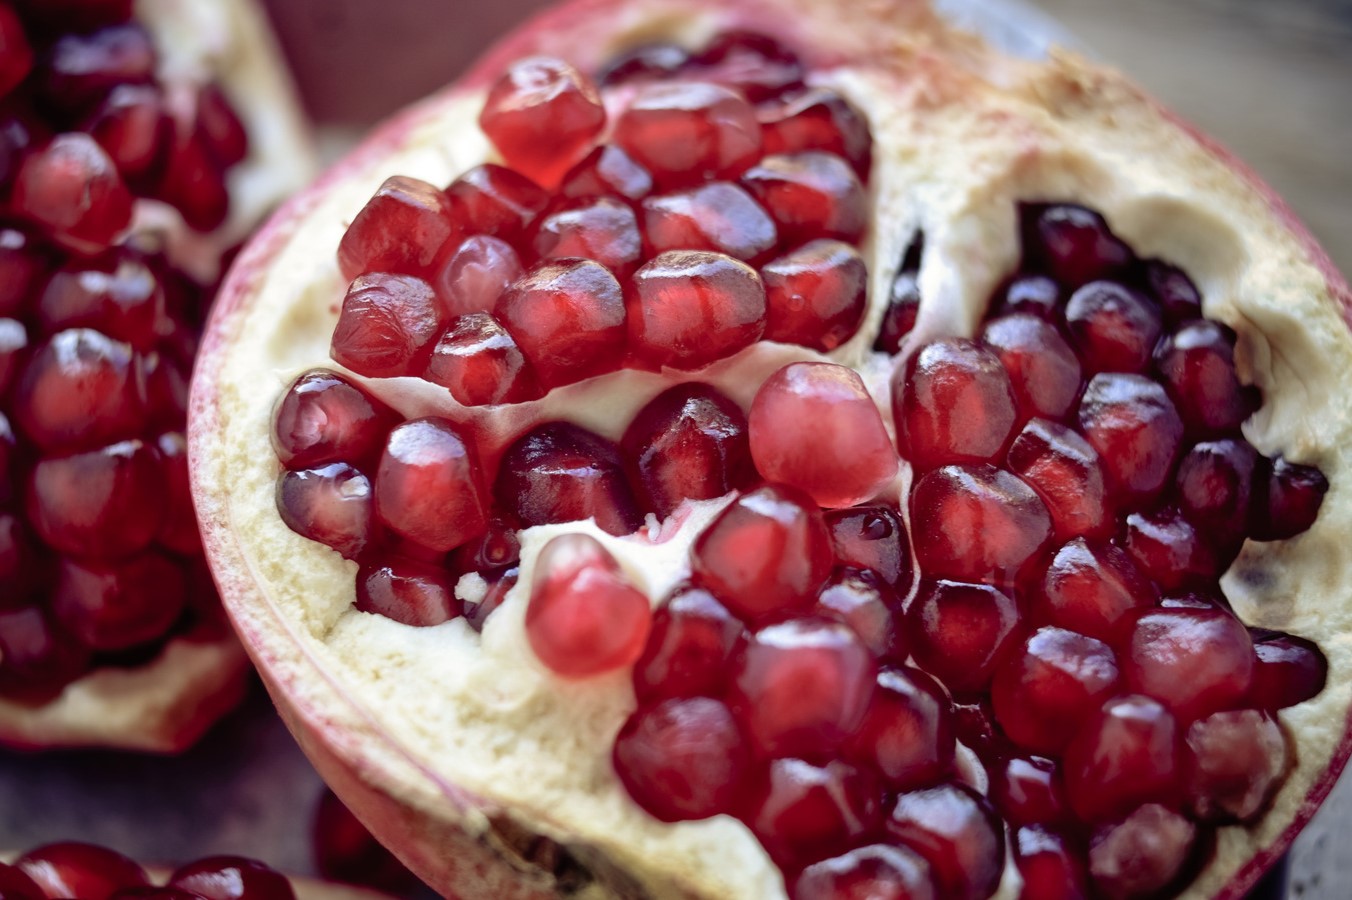 How Long Will Pomegranate Seeds Last In The Refrigerator